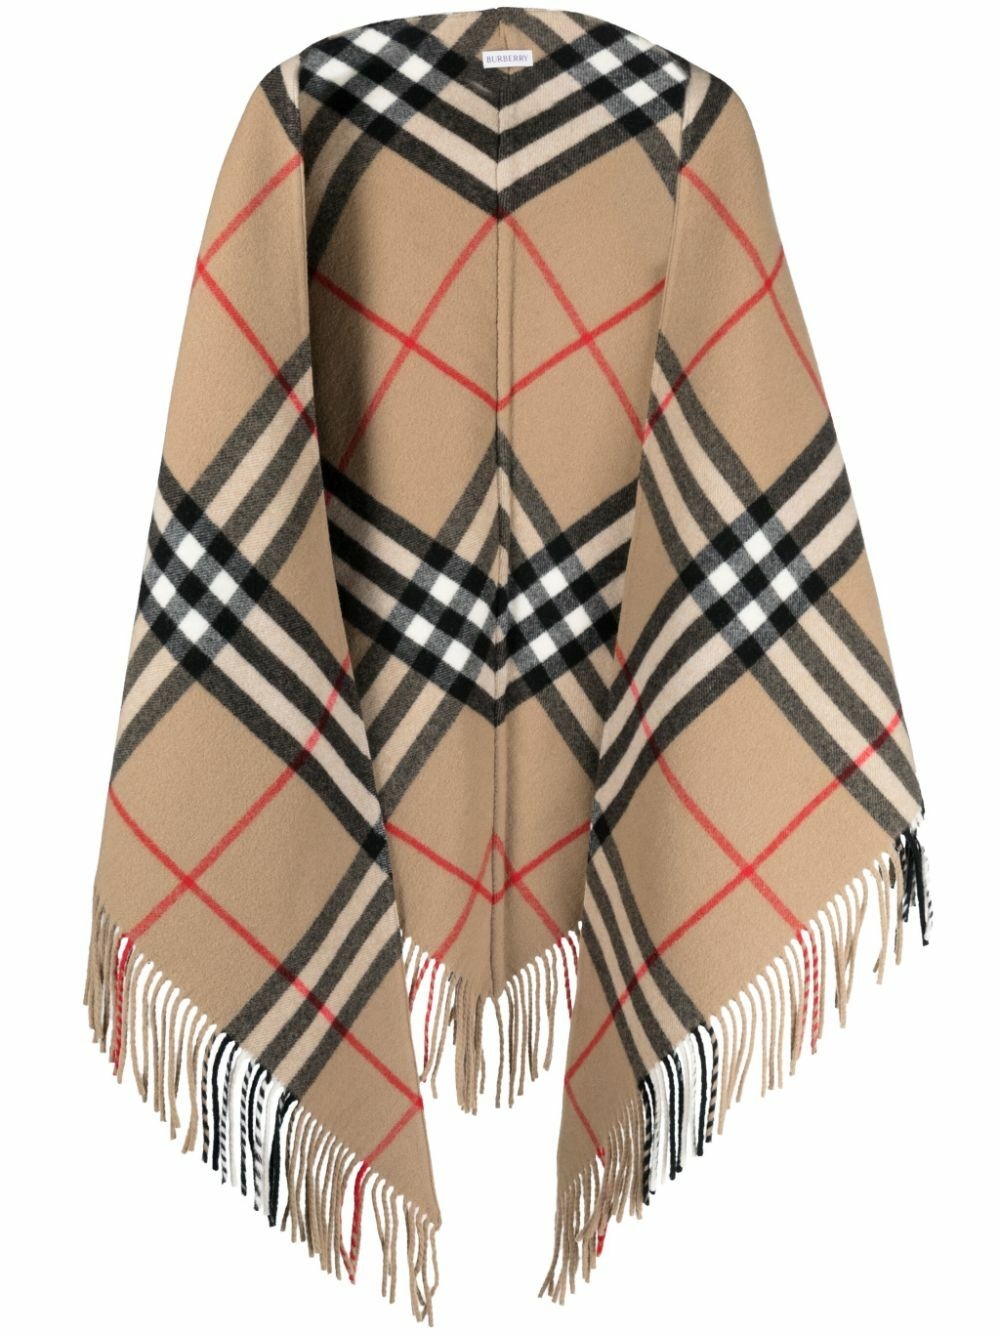 BURBERRY - Giant Check Wool Cape Burberry